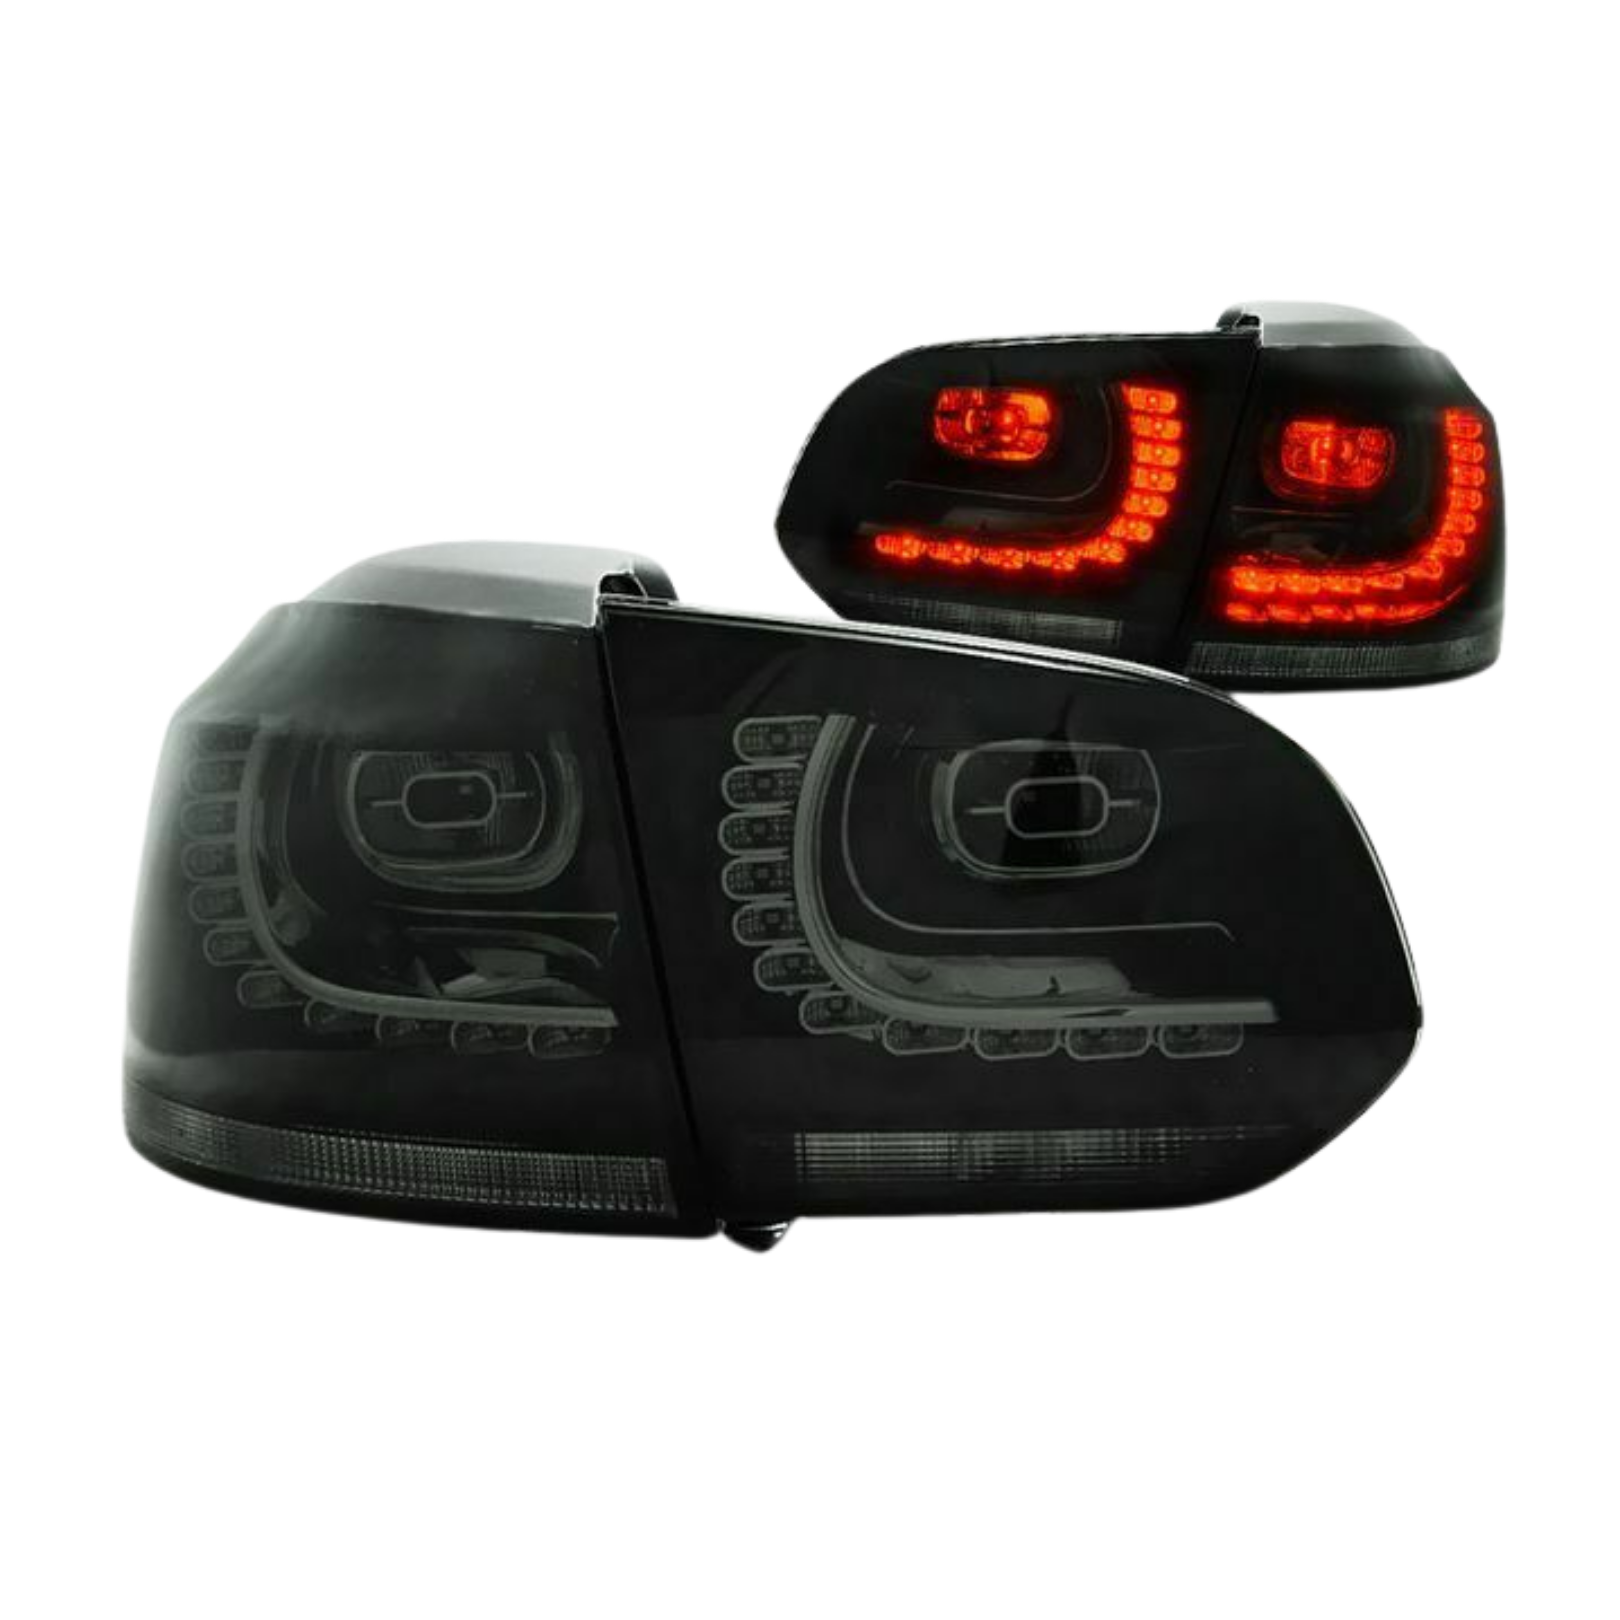 VW MK6 GOLF BLACKOUT STYLE SEQUENTIAL LED TAILLIGHTS